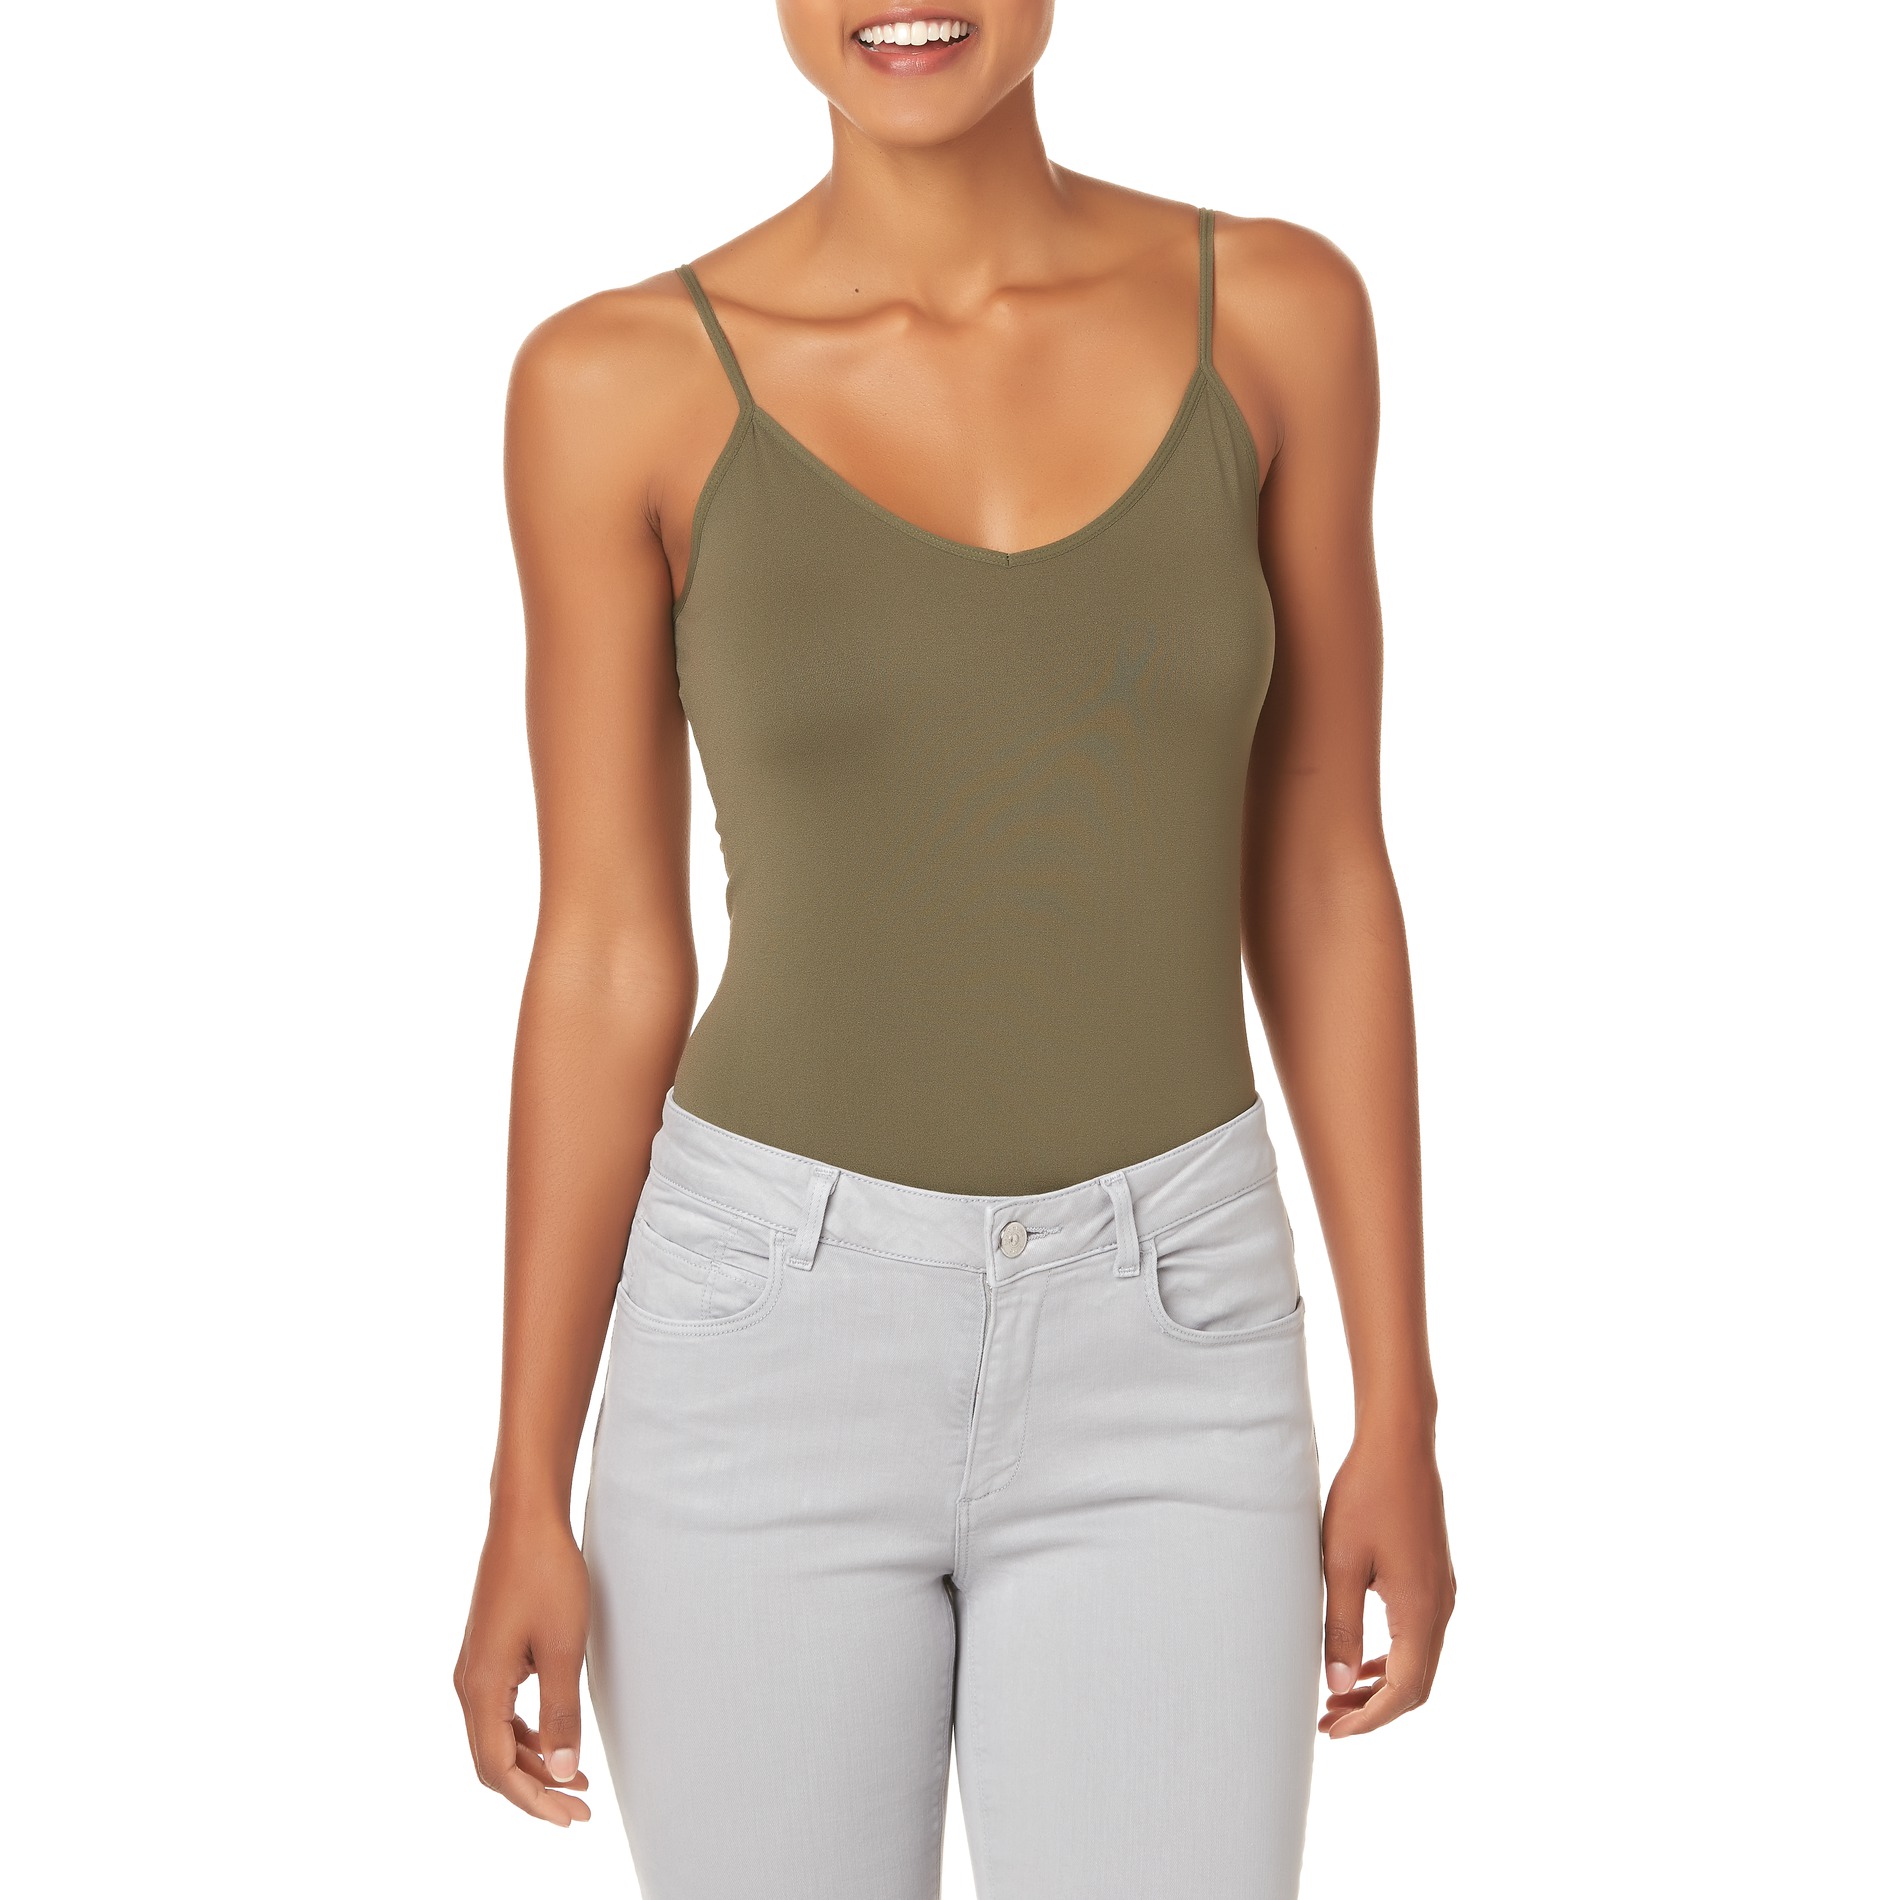 Simply Styled Women's V-Neck Camisole